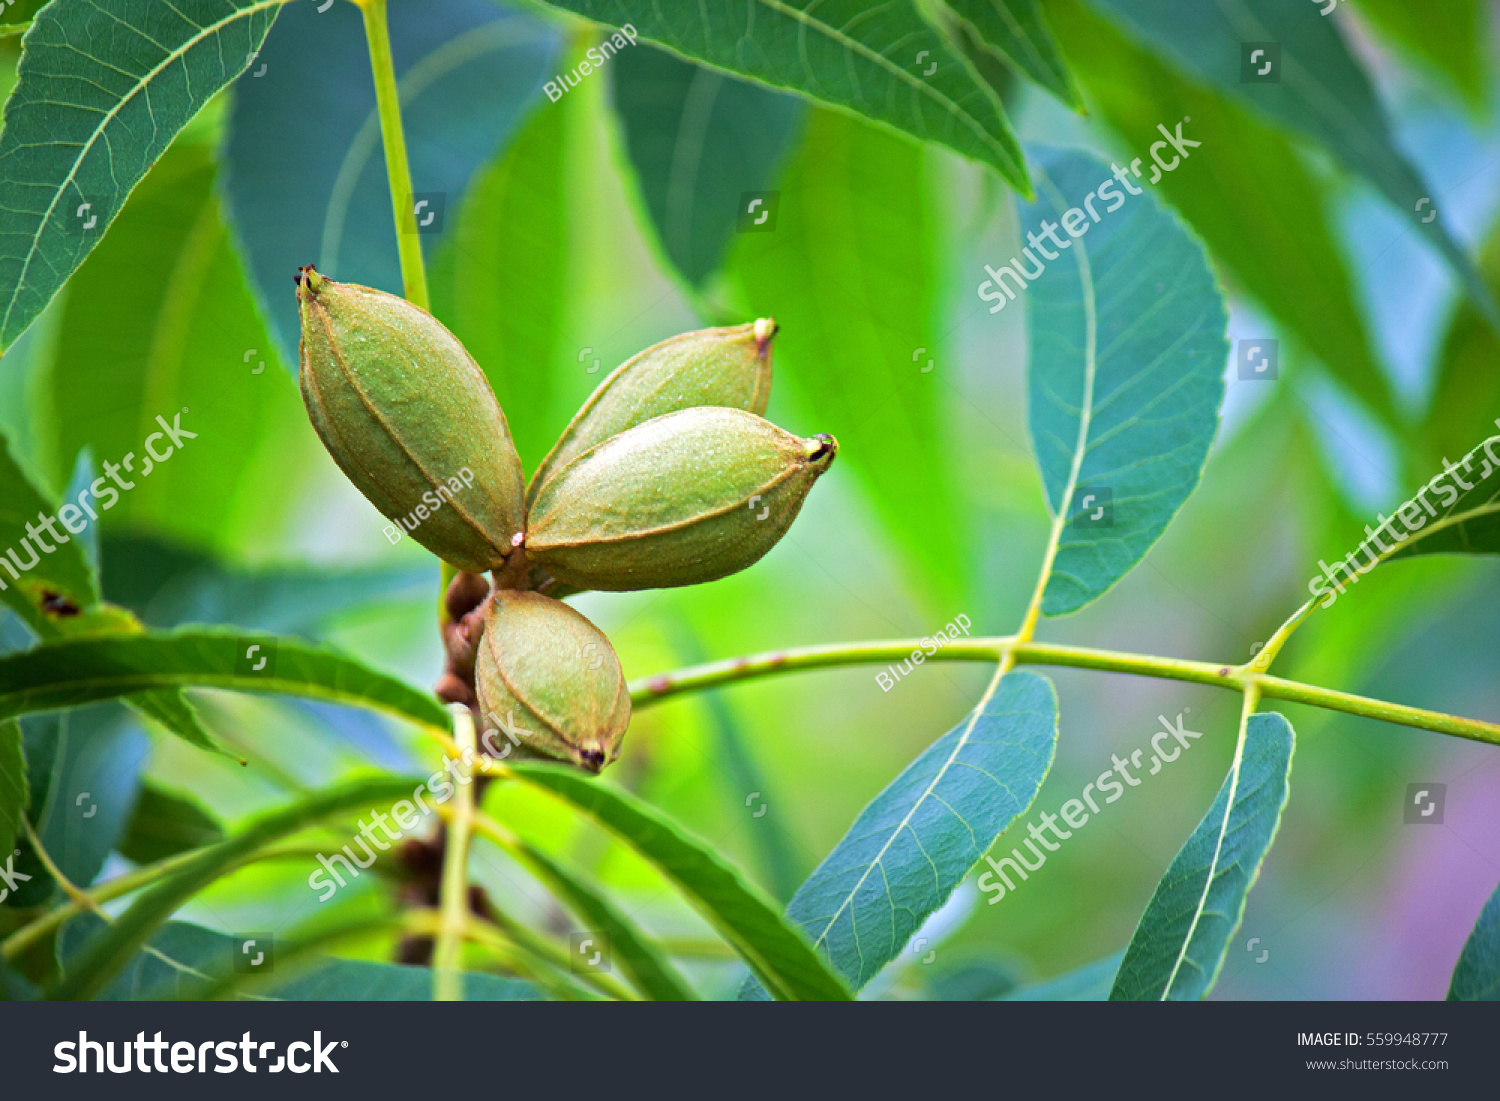 GREEN PECAN NUTS ON TREE WITH FOLIAGE #559948777